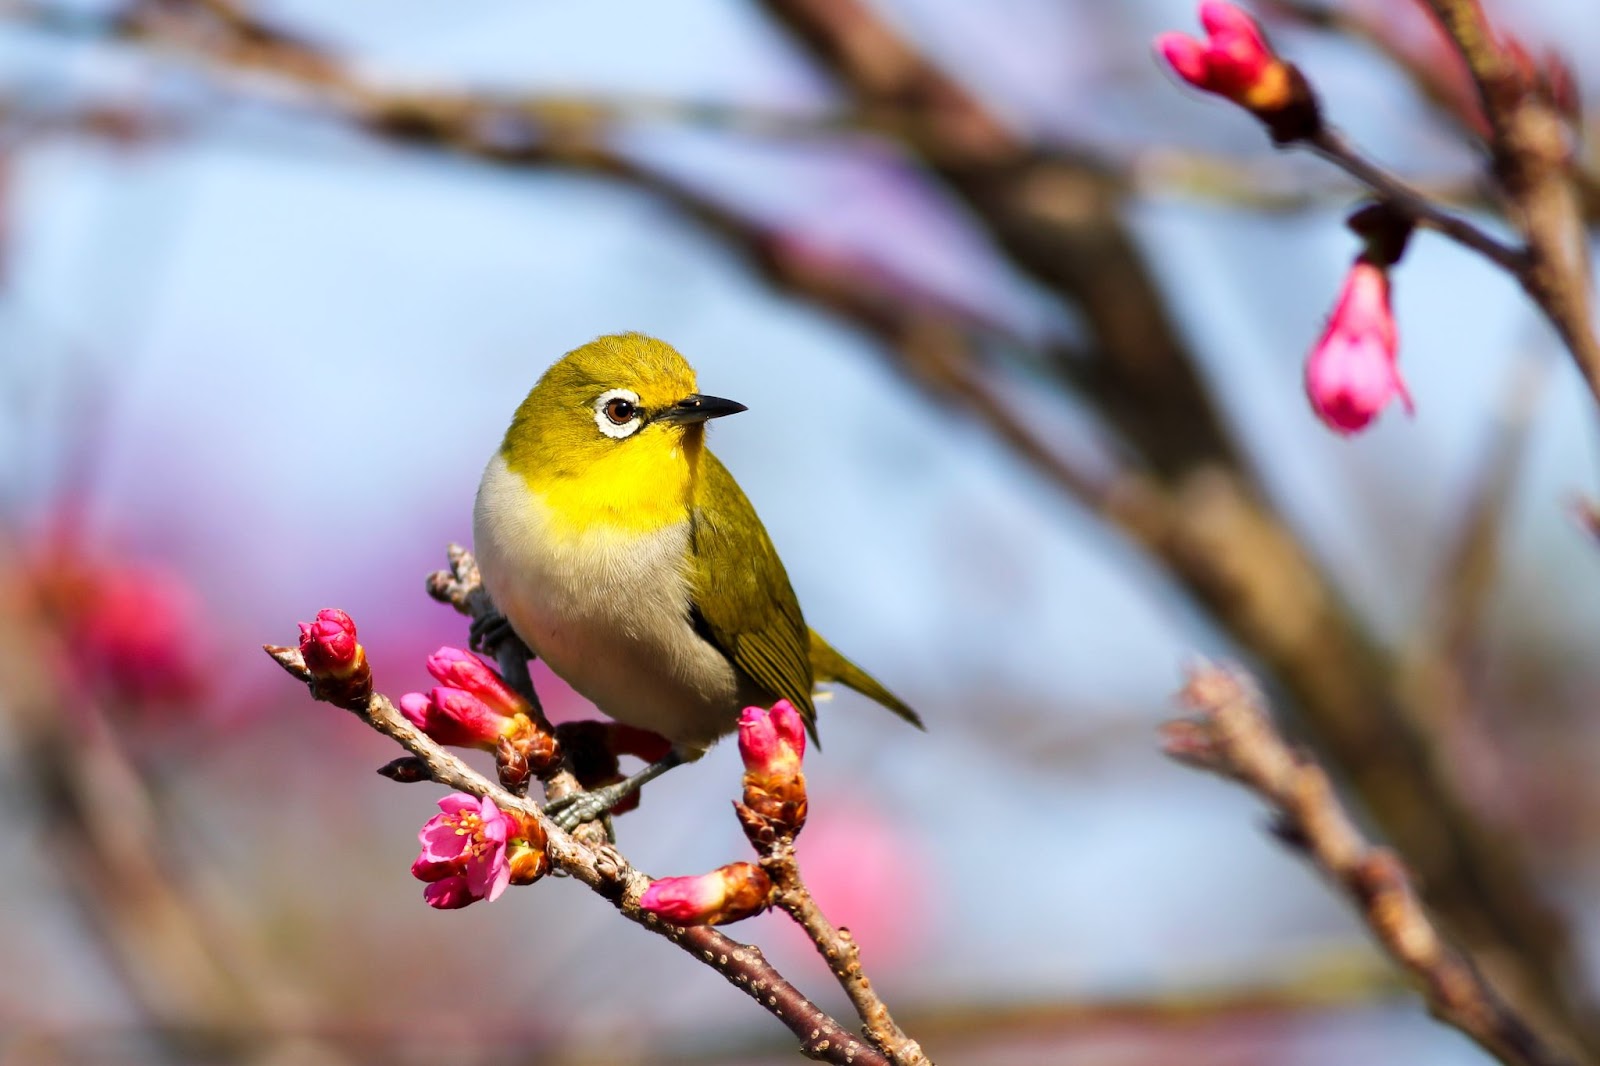 A small yellow, green and brown colored bird sitting on a tree branch.